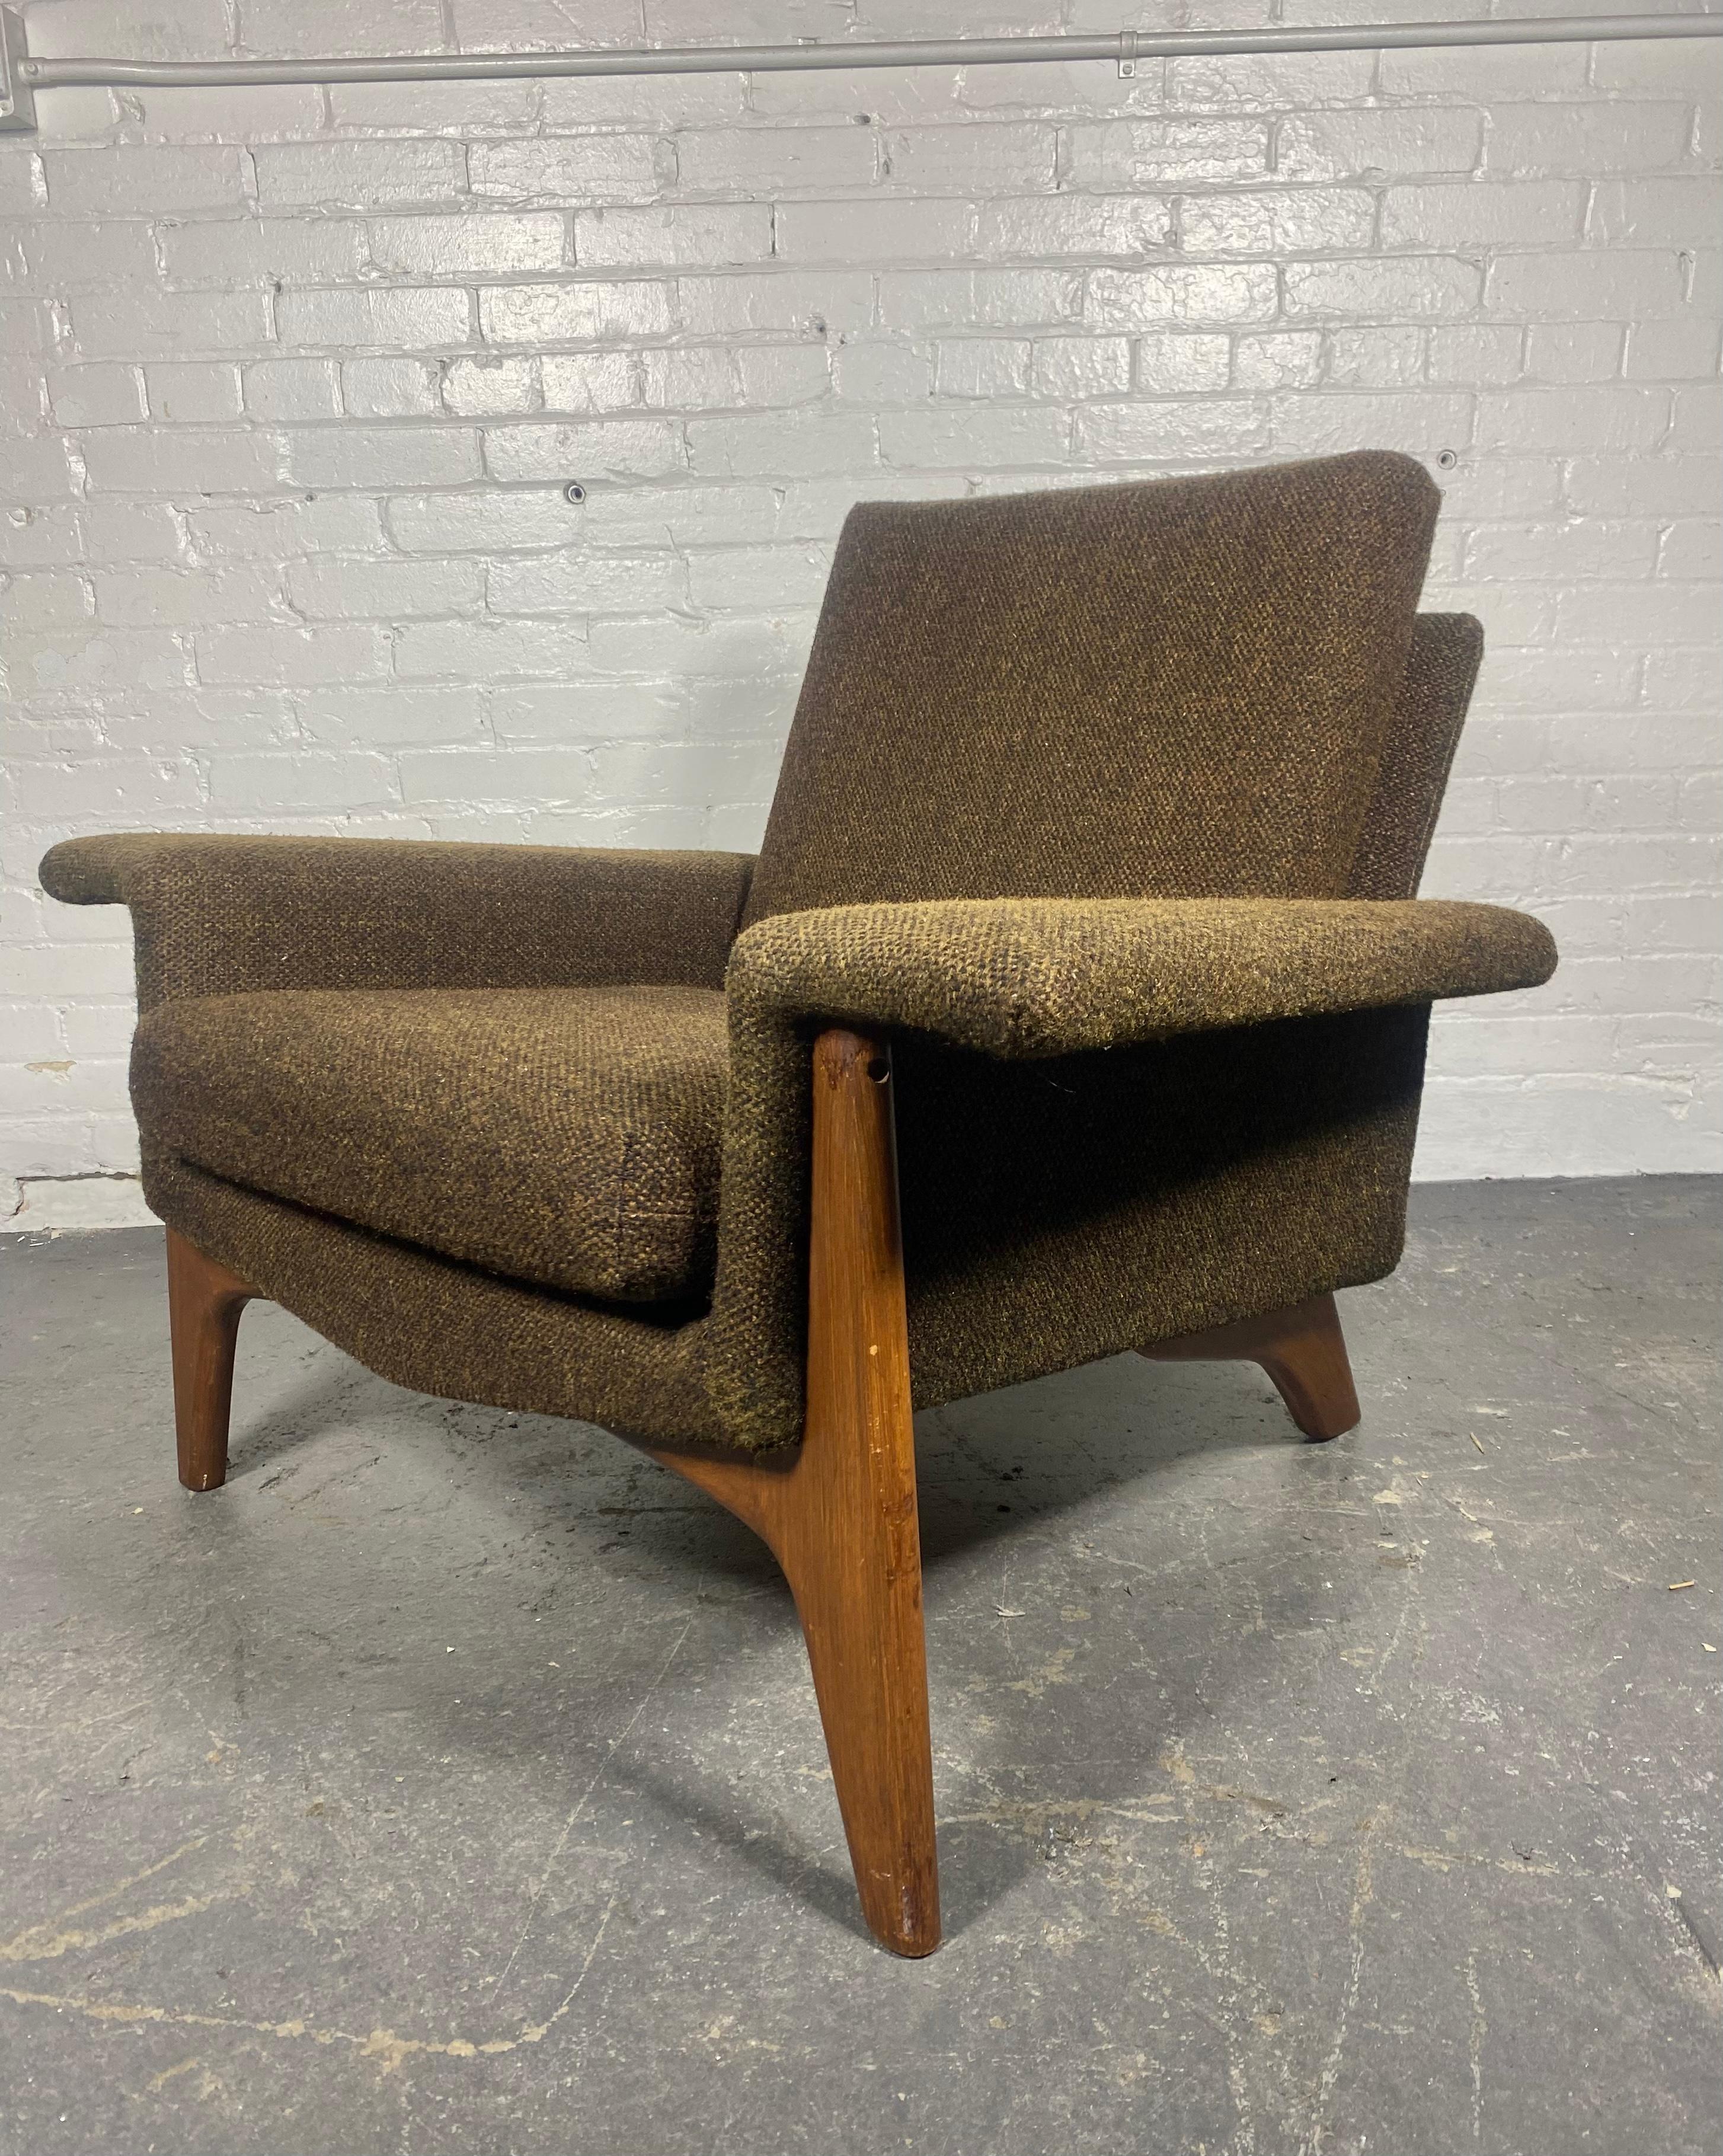 Mid-20th Century Dramatic Modernist Lounge Chair by Adrian Pearsall.Sculptural Walnut Base. For Sale